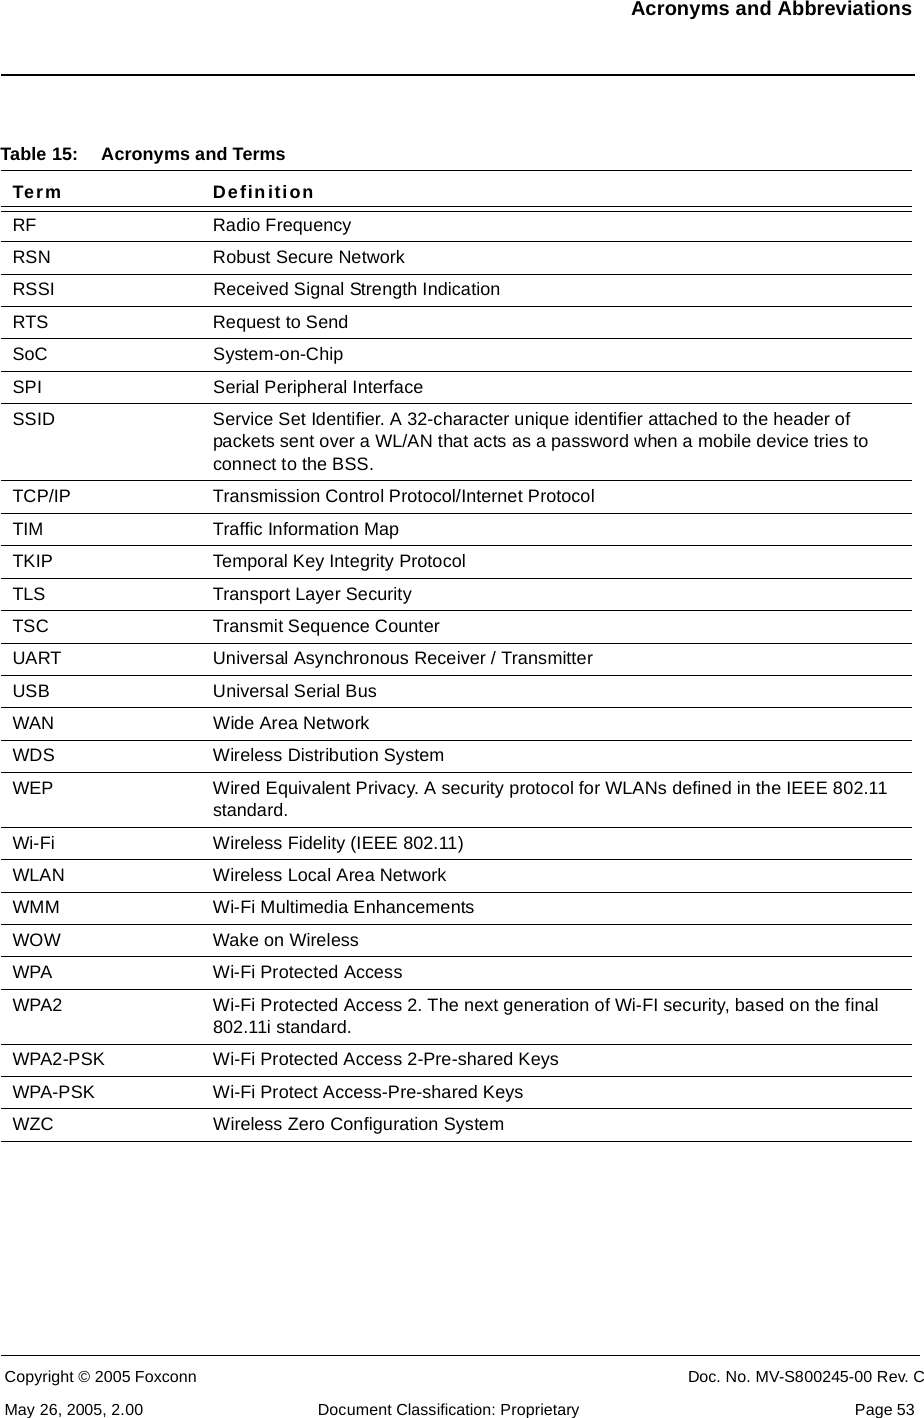 Acronyms and AbbreviationsCopyright © 2005 Foxconn CONFIDENTIAL Doc. No. MV-S800245-00 Rev. CMay 26, 2005, 2.00 Document Classification: Proprietary  Page 53RF Radio FrequencyRSN Robust Secure NetworkRSSI Received Signal Strength IndicationRTS Request to SendSoC System-on-ChipSPI Serial Peripheral InterfaceSSID Service Set Identifier. A 32-character unique identifier attached to the header of packets sent over a WL/AN that acts as a password when a mobile device tries to connect to the BSS.TCP/IP Transmission Control Protocol/Internet ProtocolTIM Traffic Information MapTKIP Temporal Key Integrity ProtocolTLS Transport Layer SecurityTSC Transmit Sequence CounterUART Universal Asynchronous Receiver / TransmitterUSB Universal Serial BusWAN Wide Area NetworkWDS Wireless Distribution SystemWEP Wired Equivalent Privacy. A security protocol for WLANs defined in the IEEE 802.11 standard.Wi-Fi Wireless Fidelity (IEEE 802.11)WLAN Wireless Local Area NetworkWMM Wi-Fi Multimedia EnhancementsWOW Wake on WirelessWPA Wi-Fi Protected AccessWPA2 Wi-Fi Protected Access 2. The next generation of Wi-FI security, based on the final 802.11i standard.WPA2-PSK Wi-Fi Protected Access 2-Pre-shared KeysWPA-PSK Wi-Fi Protect Access-Pre-shared KeysWZC Wireless Zero Configuration SystemTable 15: Acronyms and TermsTerm Definition